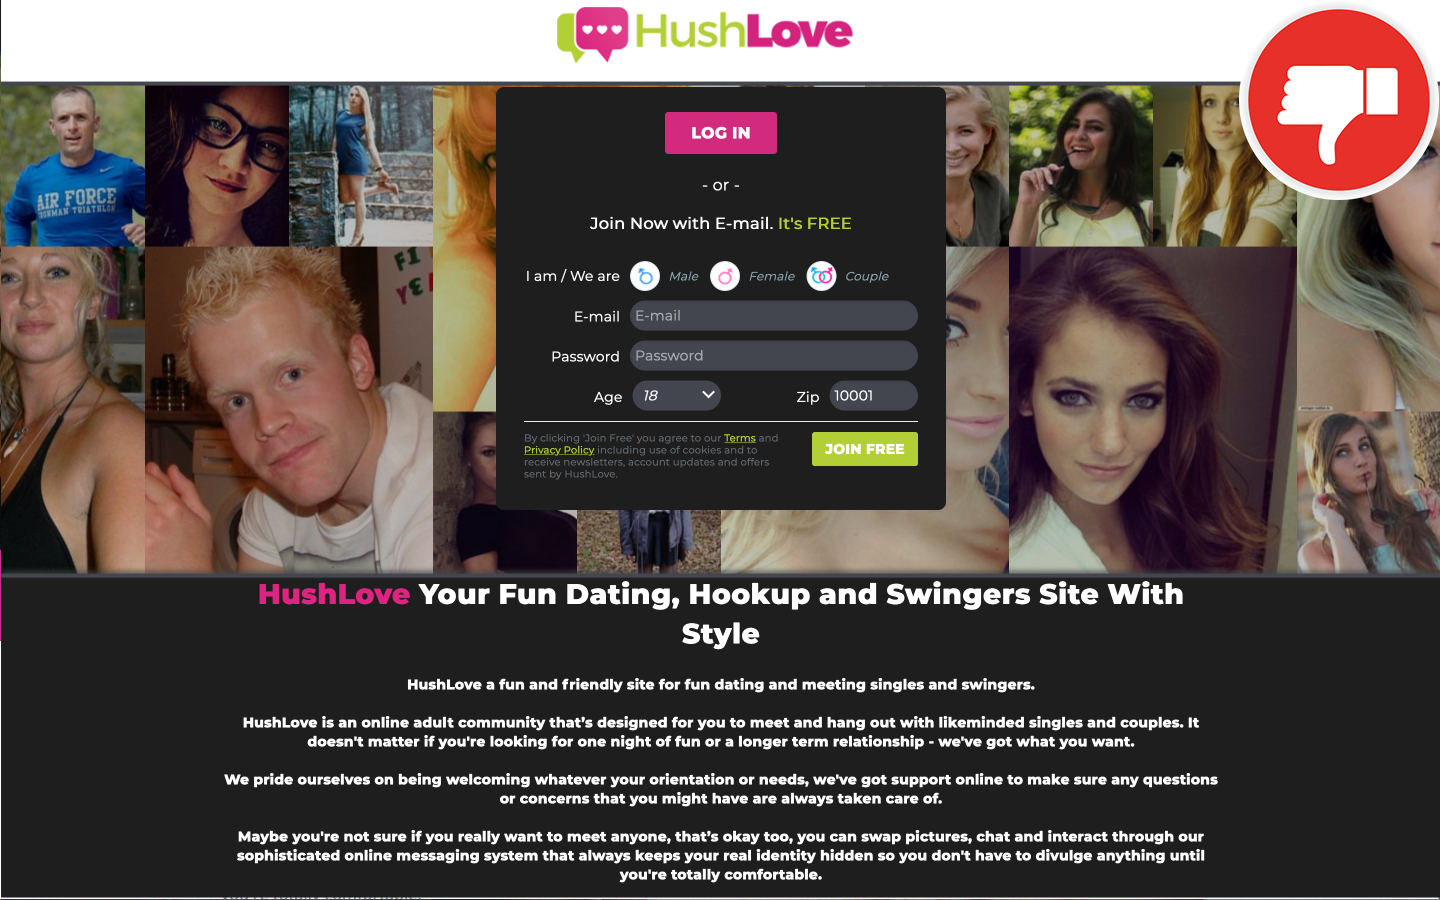 Love dating review hush site Fling Review